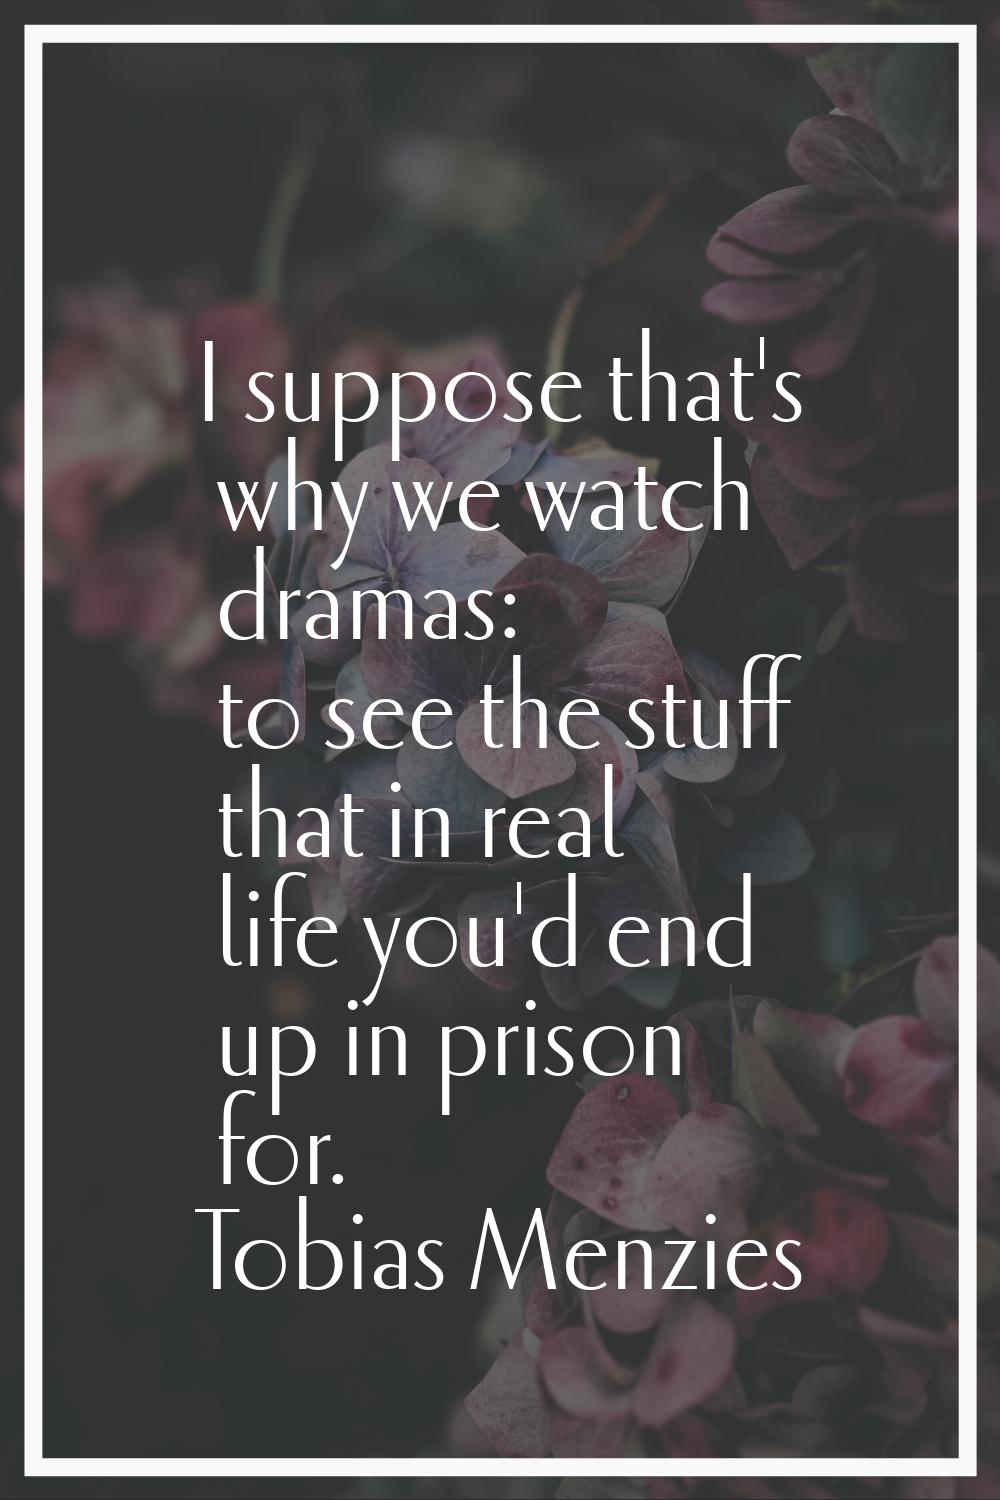 I suppose that's why we watch dramas: to see the stuff that in real life you'd end up in prison for